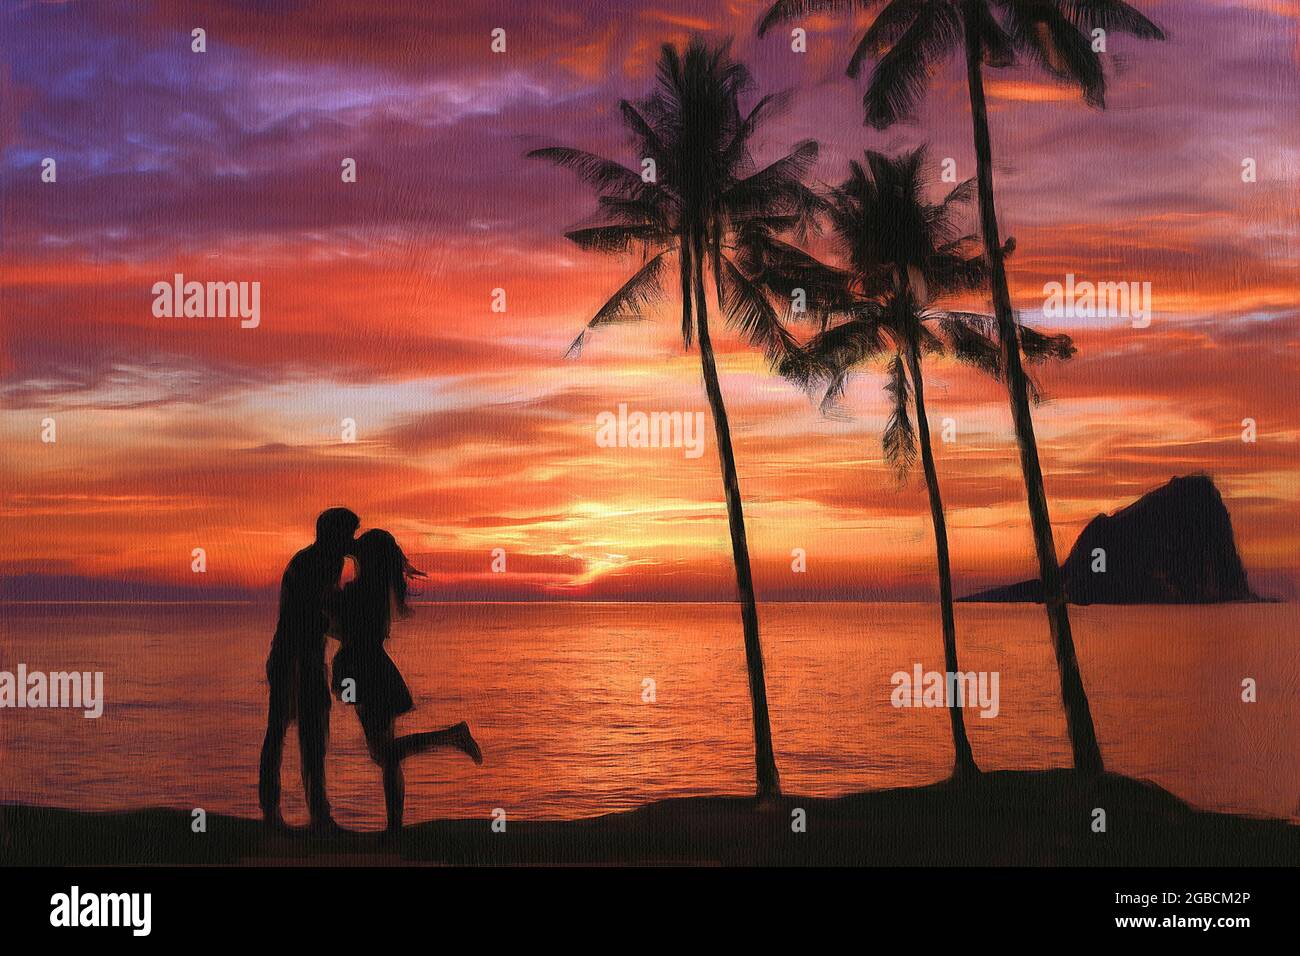 Young couple kissing against a dramatic sky and sunset given a painted and textured appearance. Stock Photo